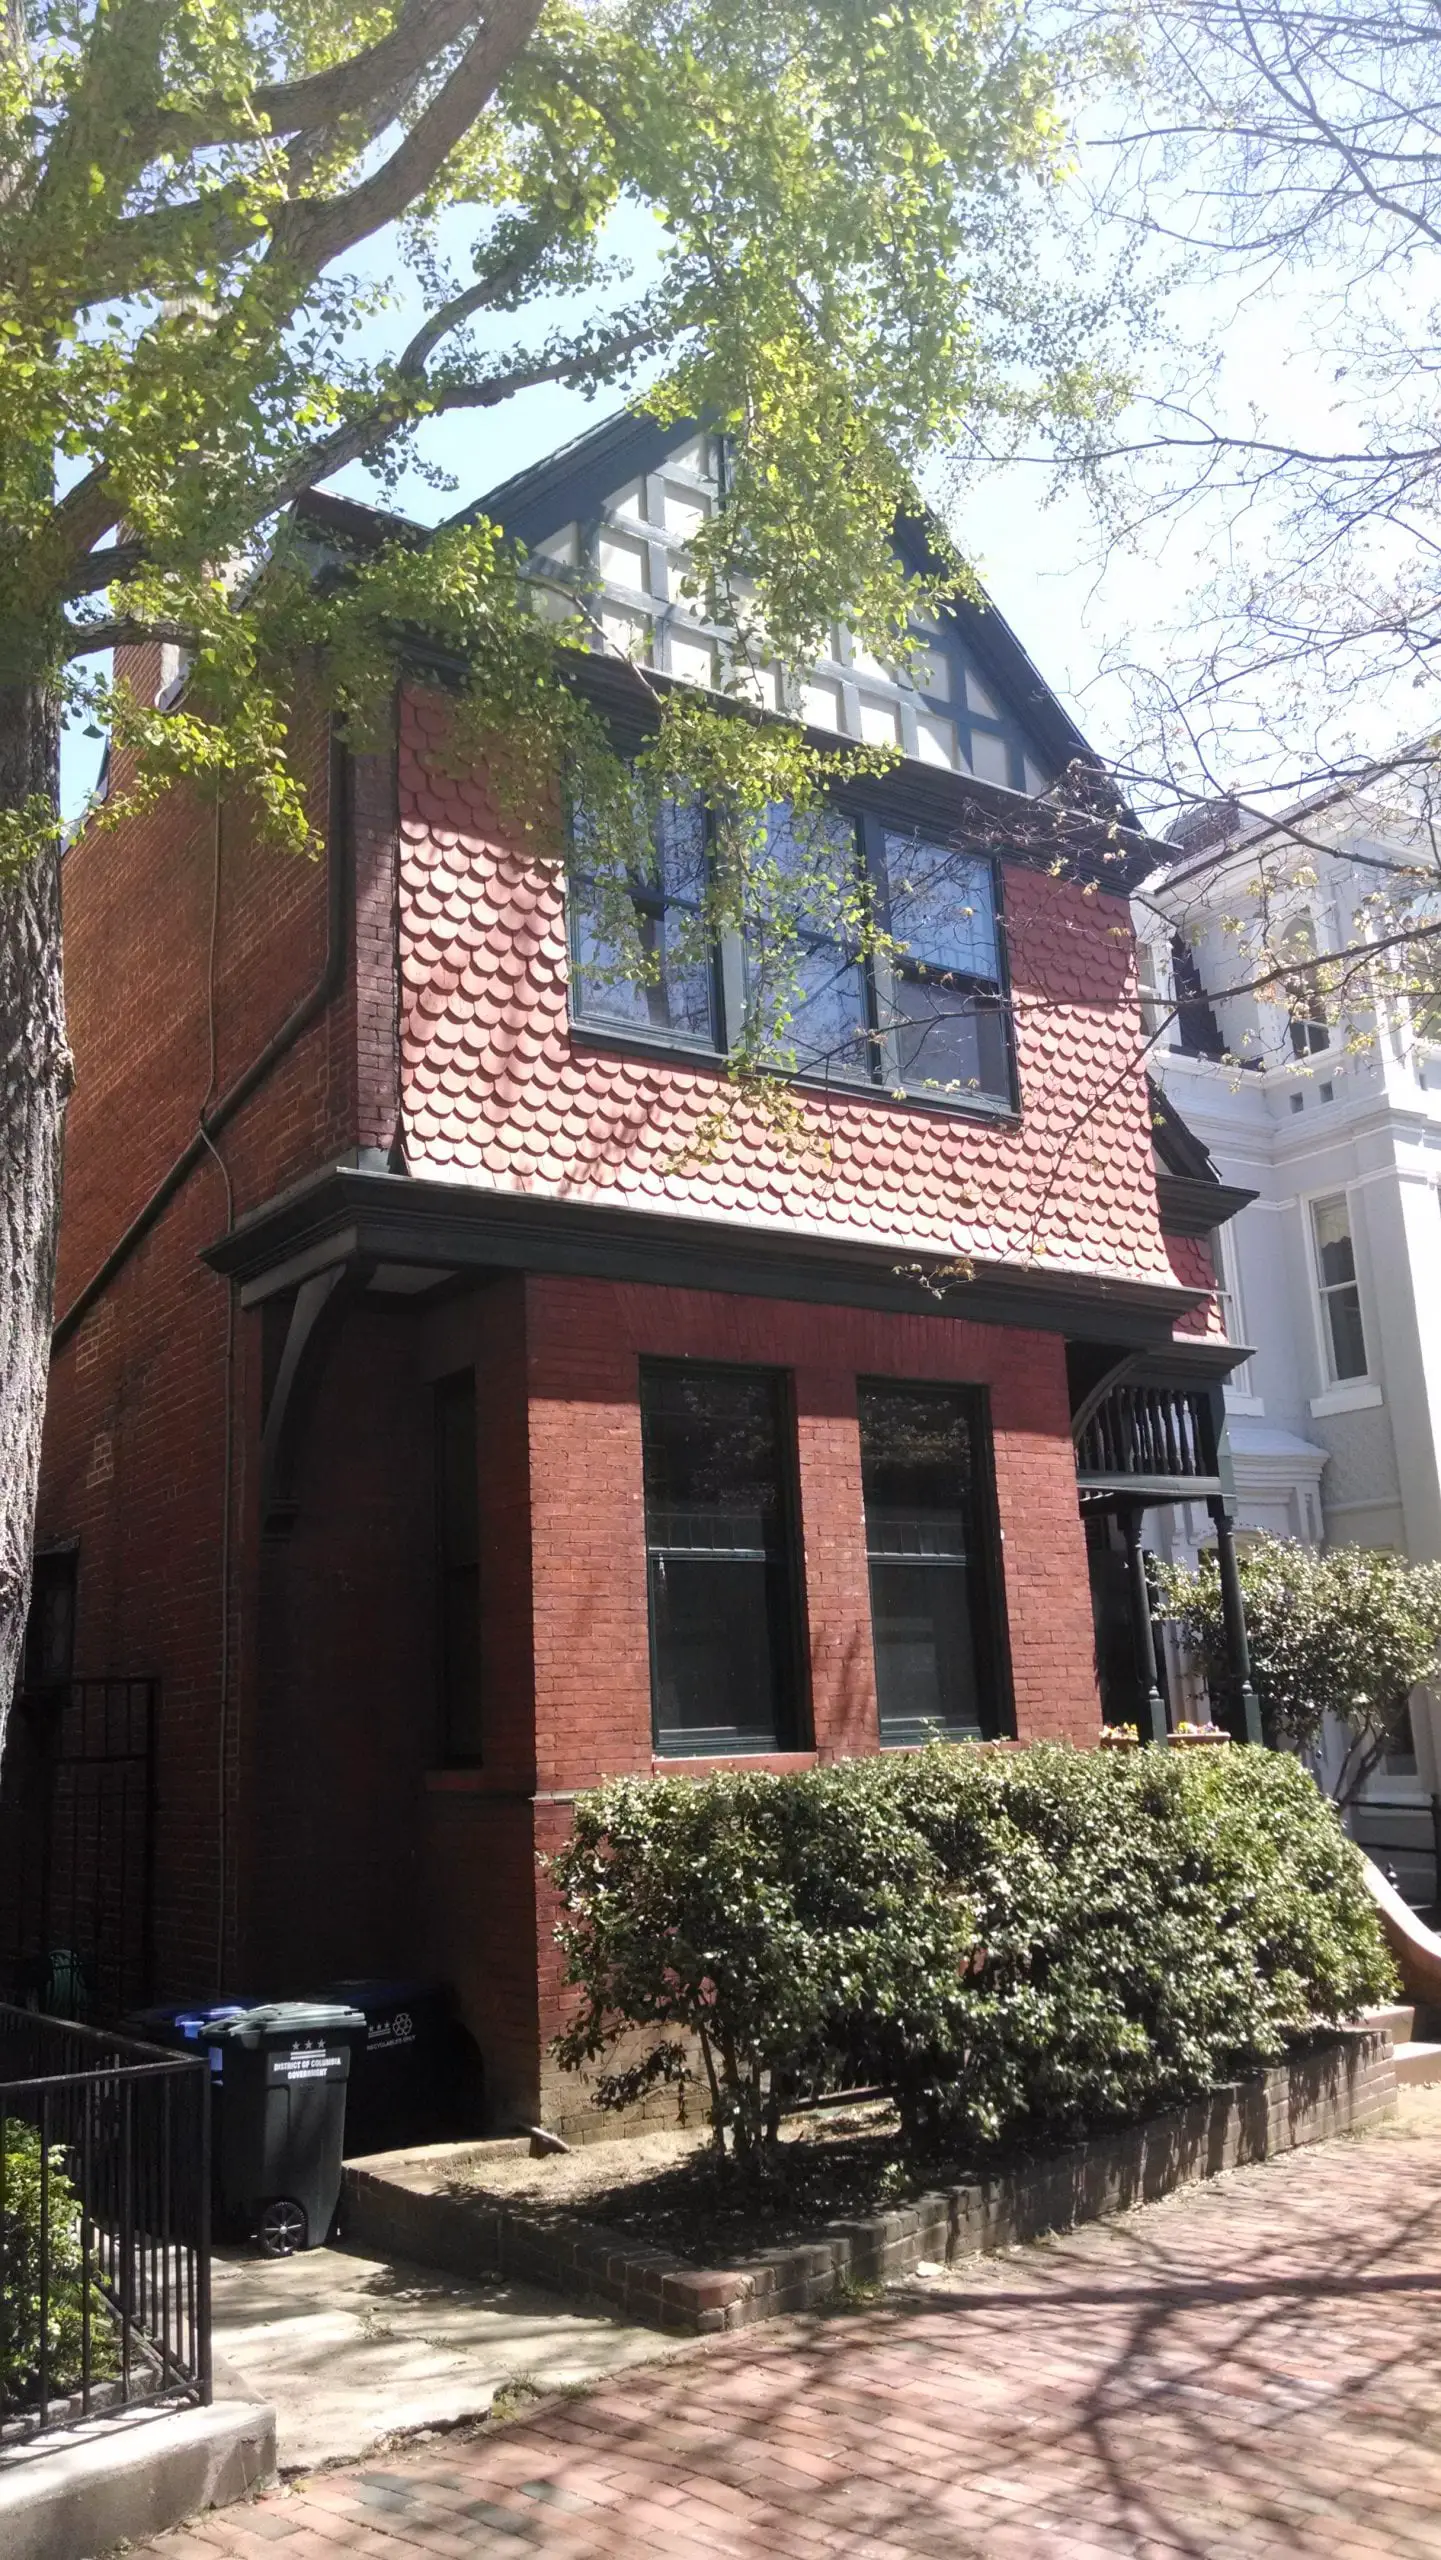 Close view of 1523 31st St. NW